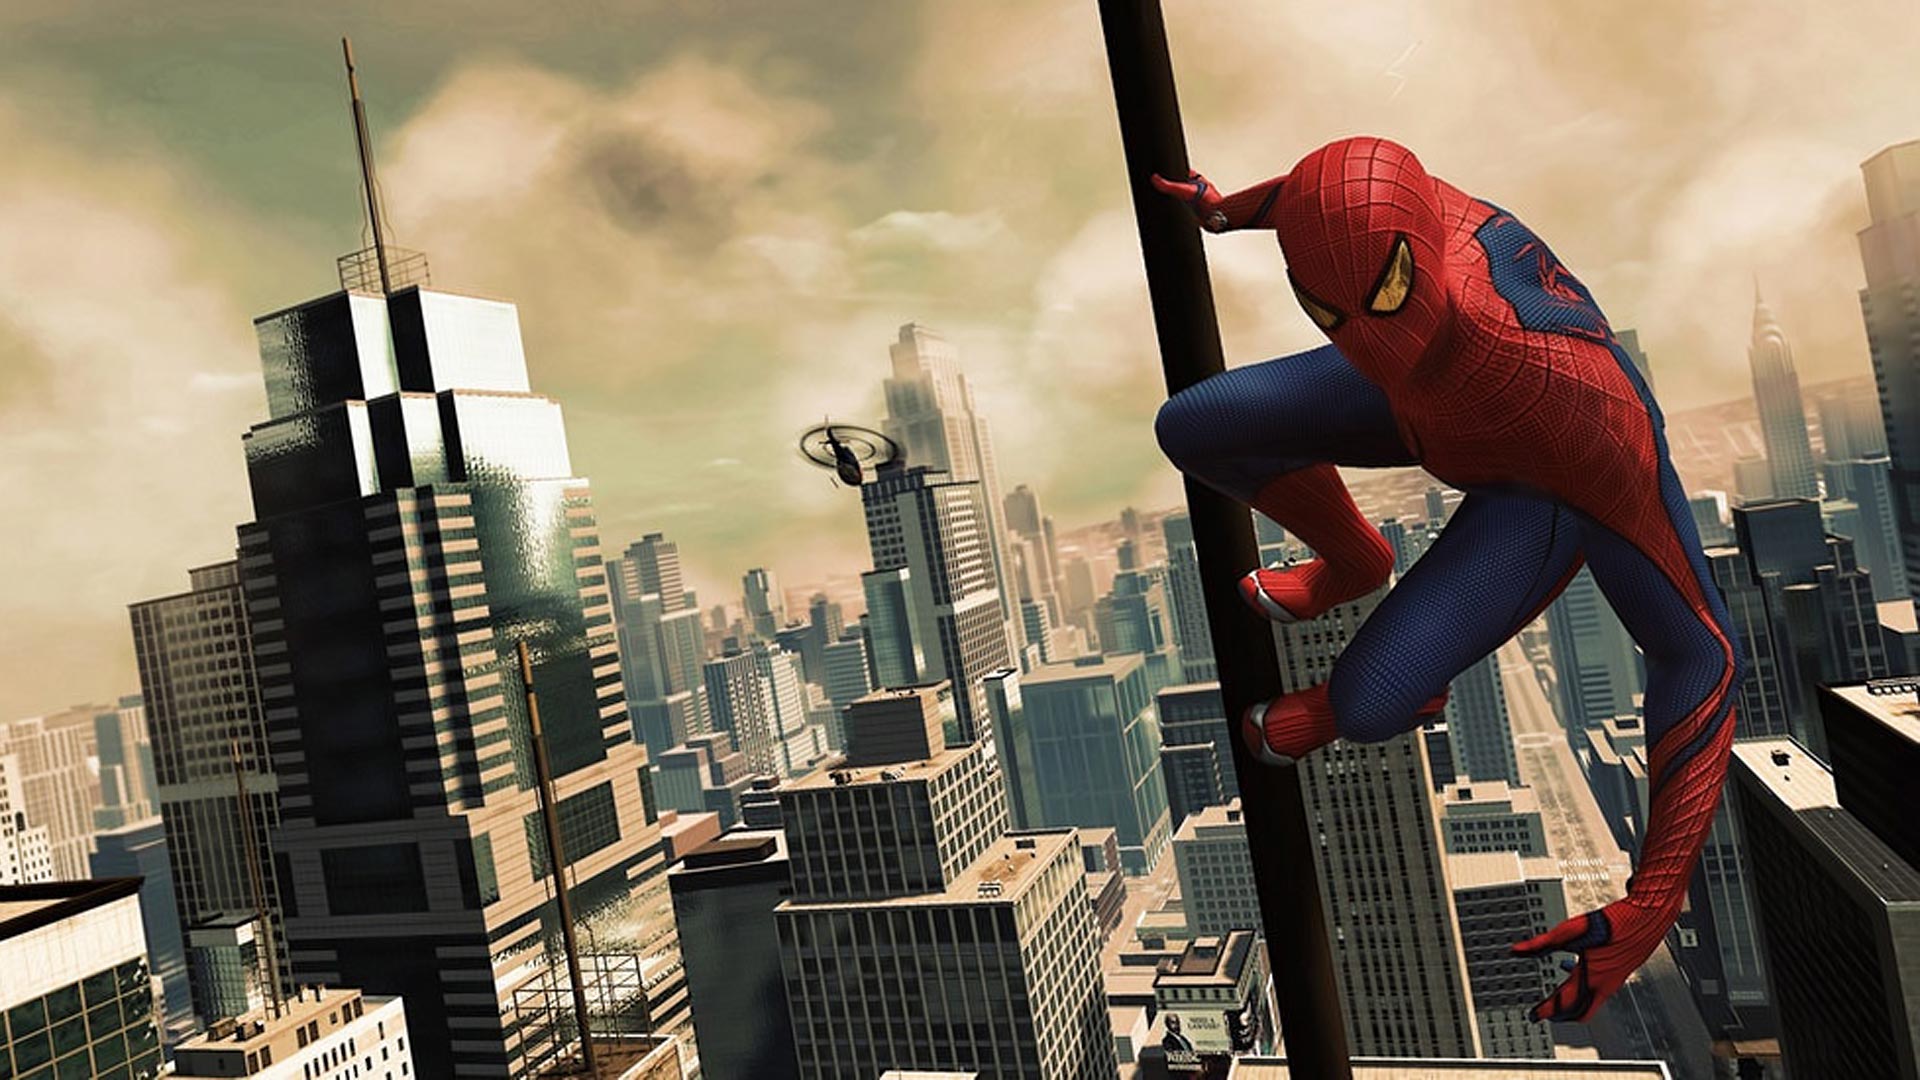 the amazing spider man hd wallpaper - Welcome to TrueHDWallpapers.com